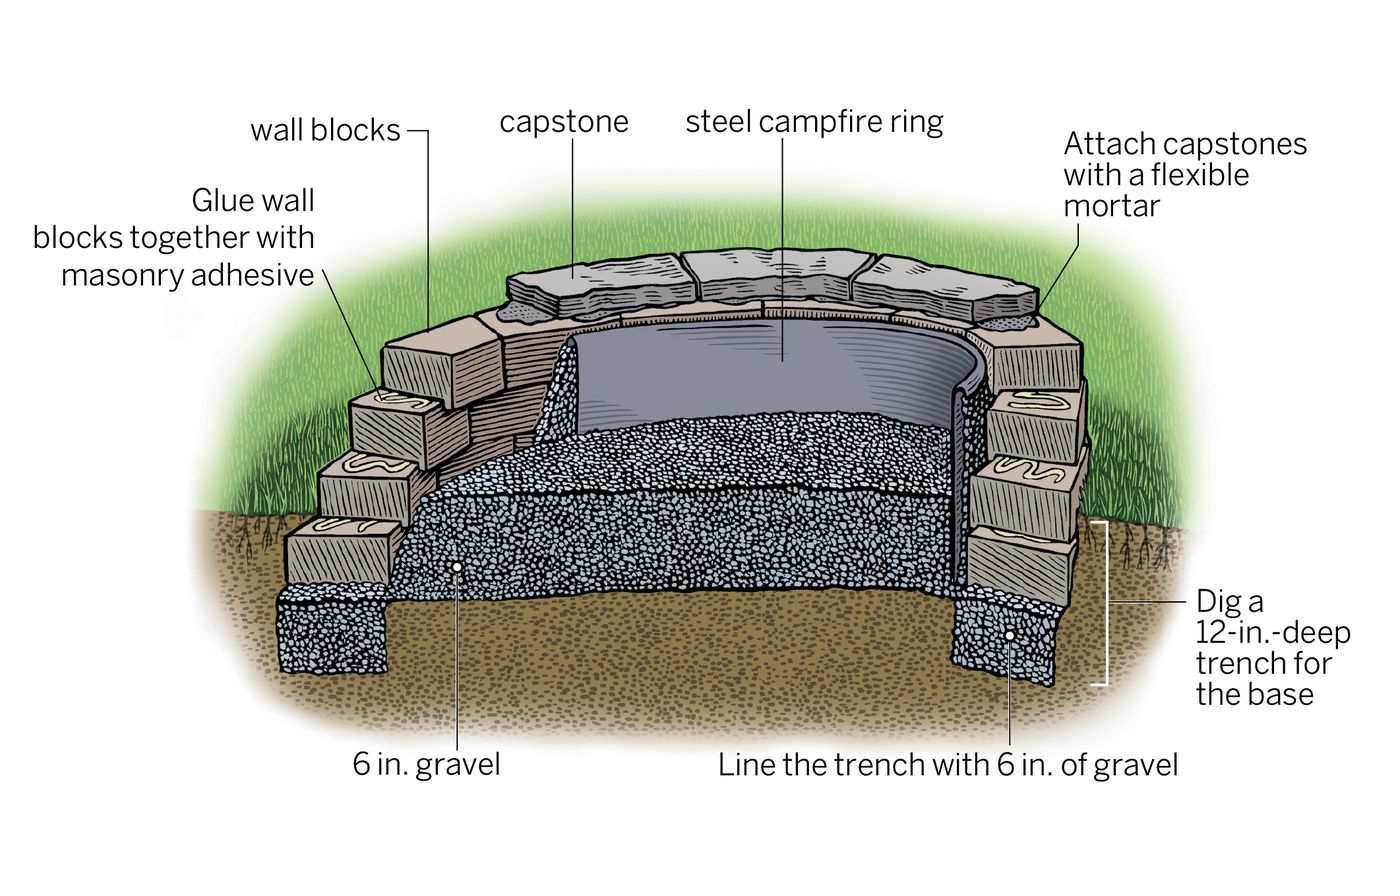 Diy Fire Pit In 8 Steps This Old House